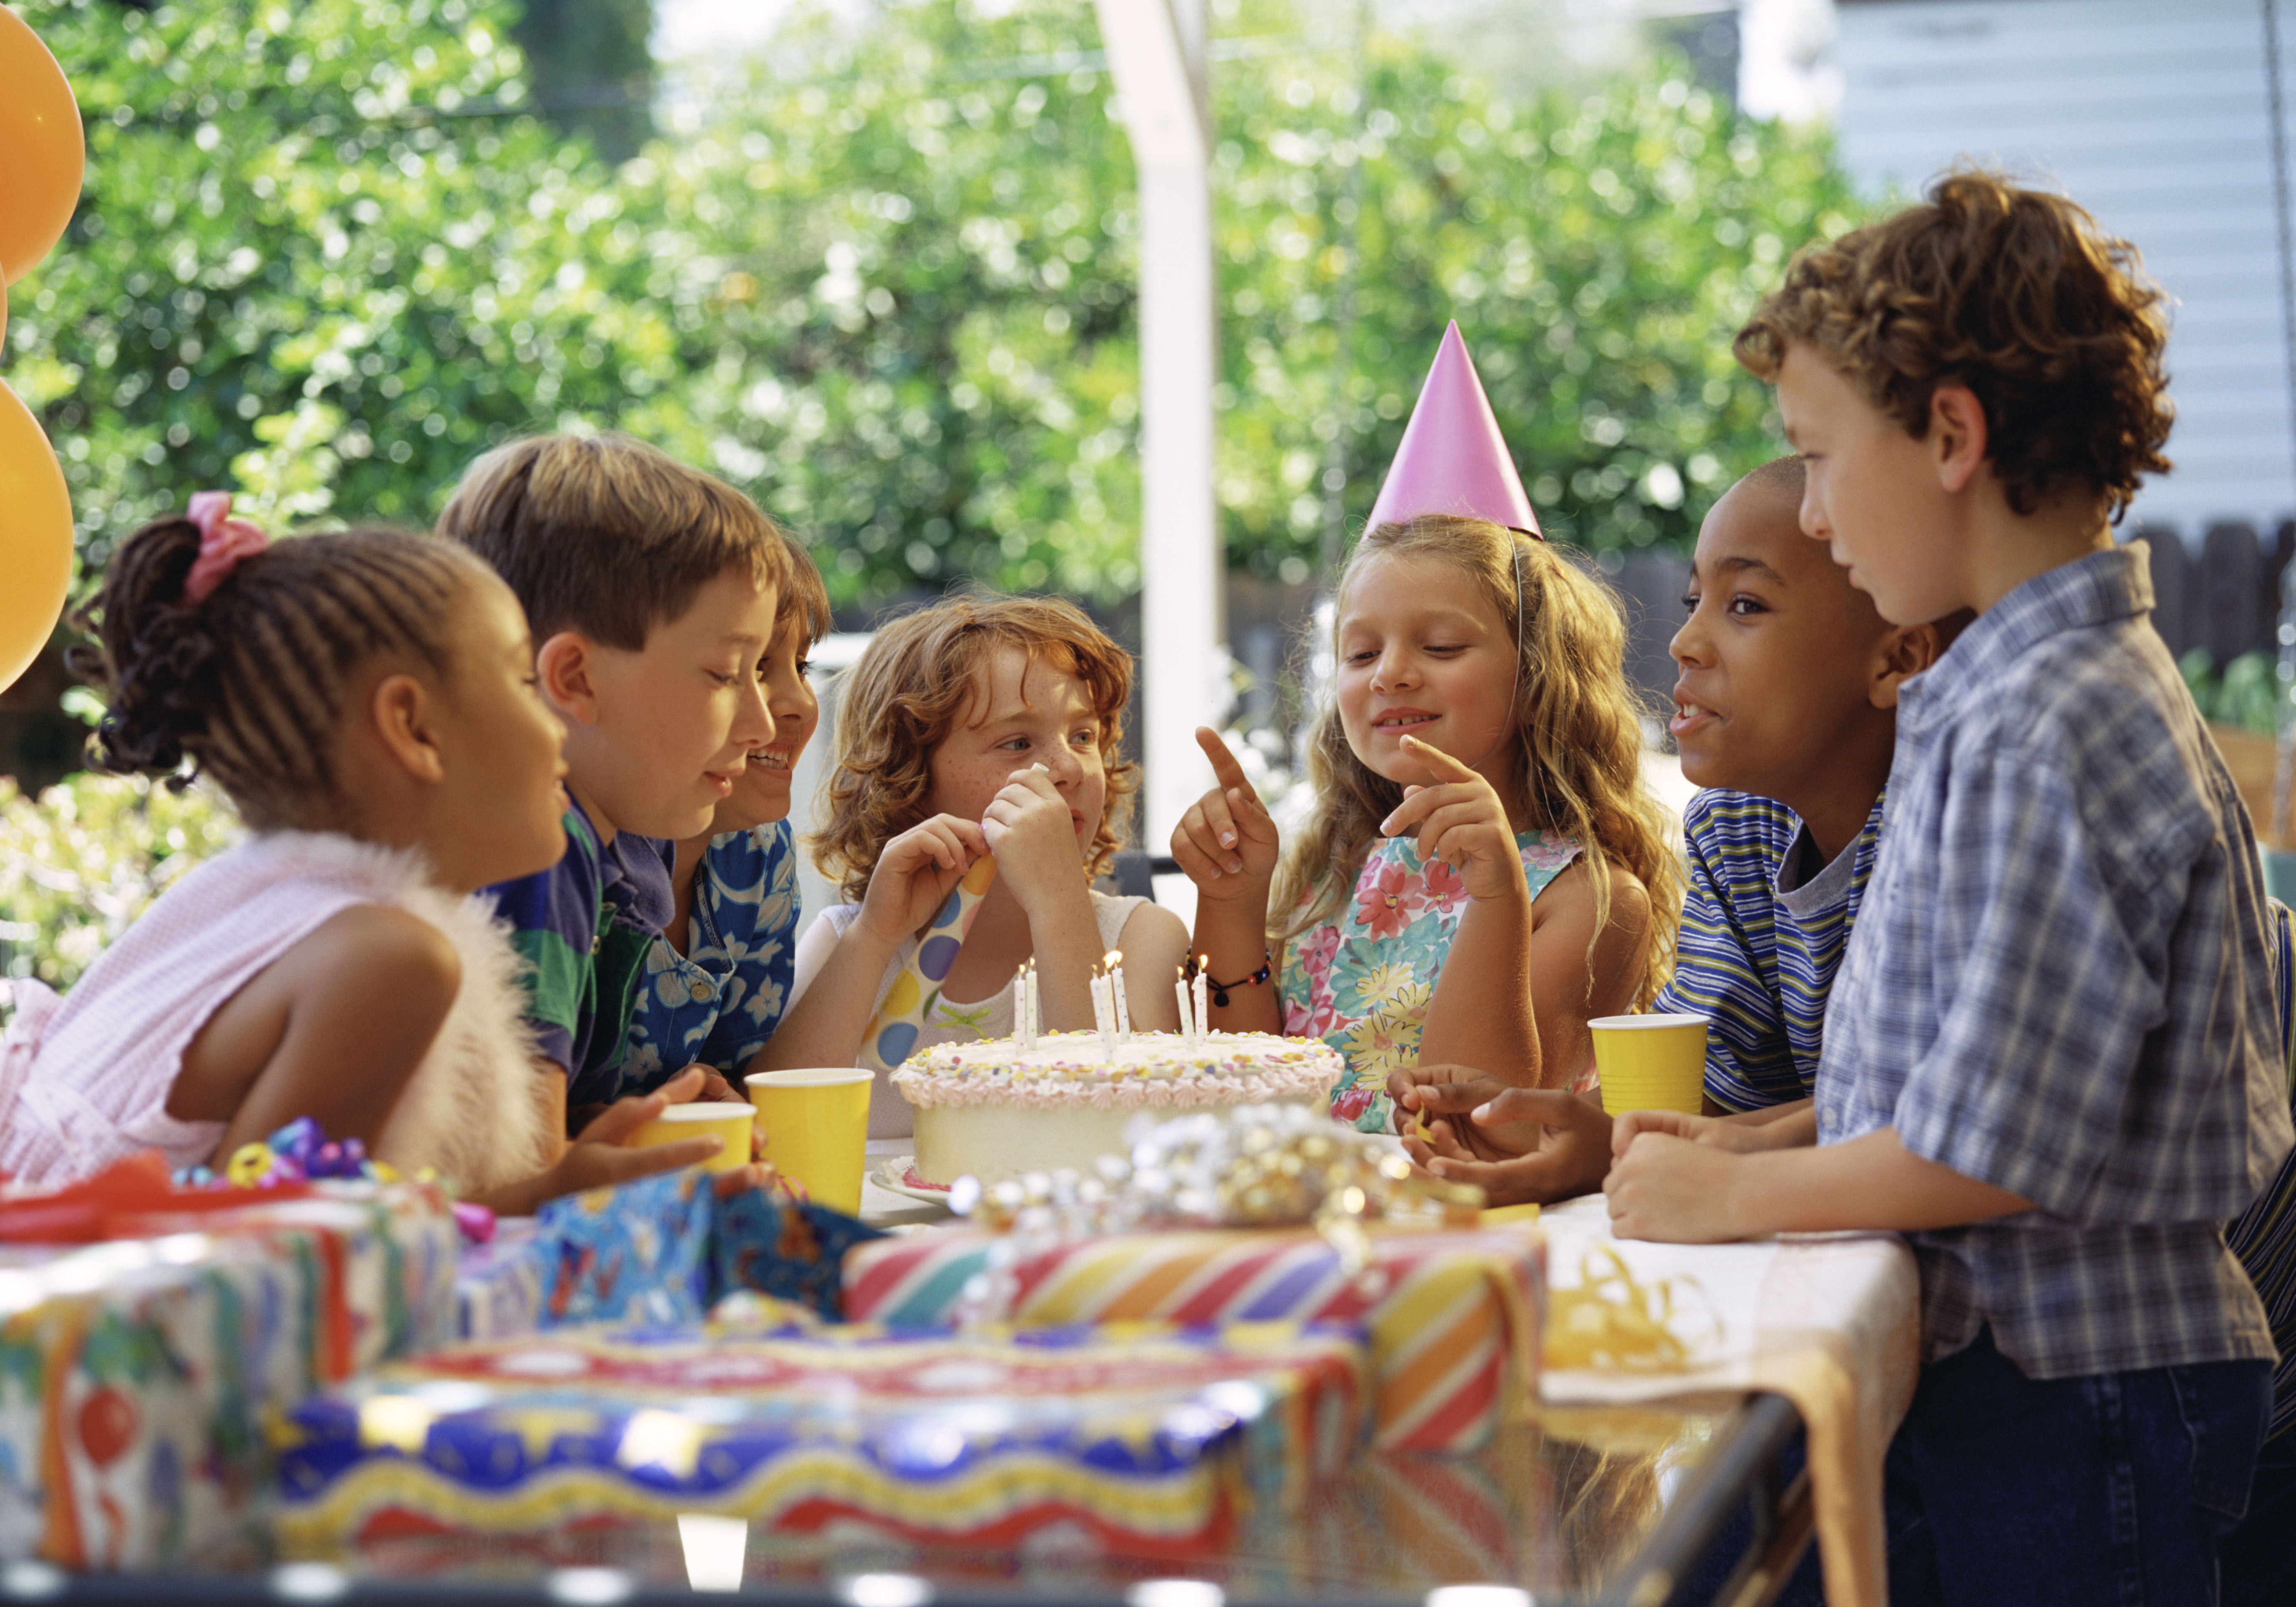 Kids at birthday party | Source: Getty Images